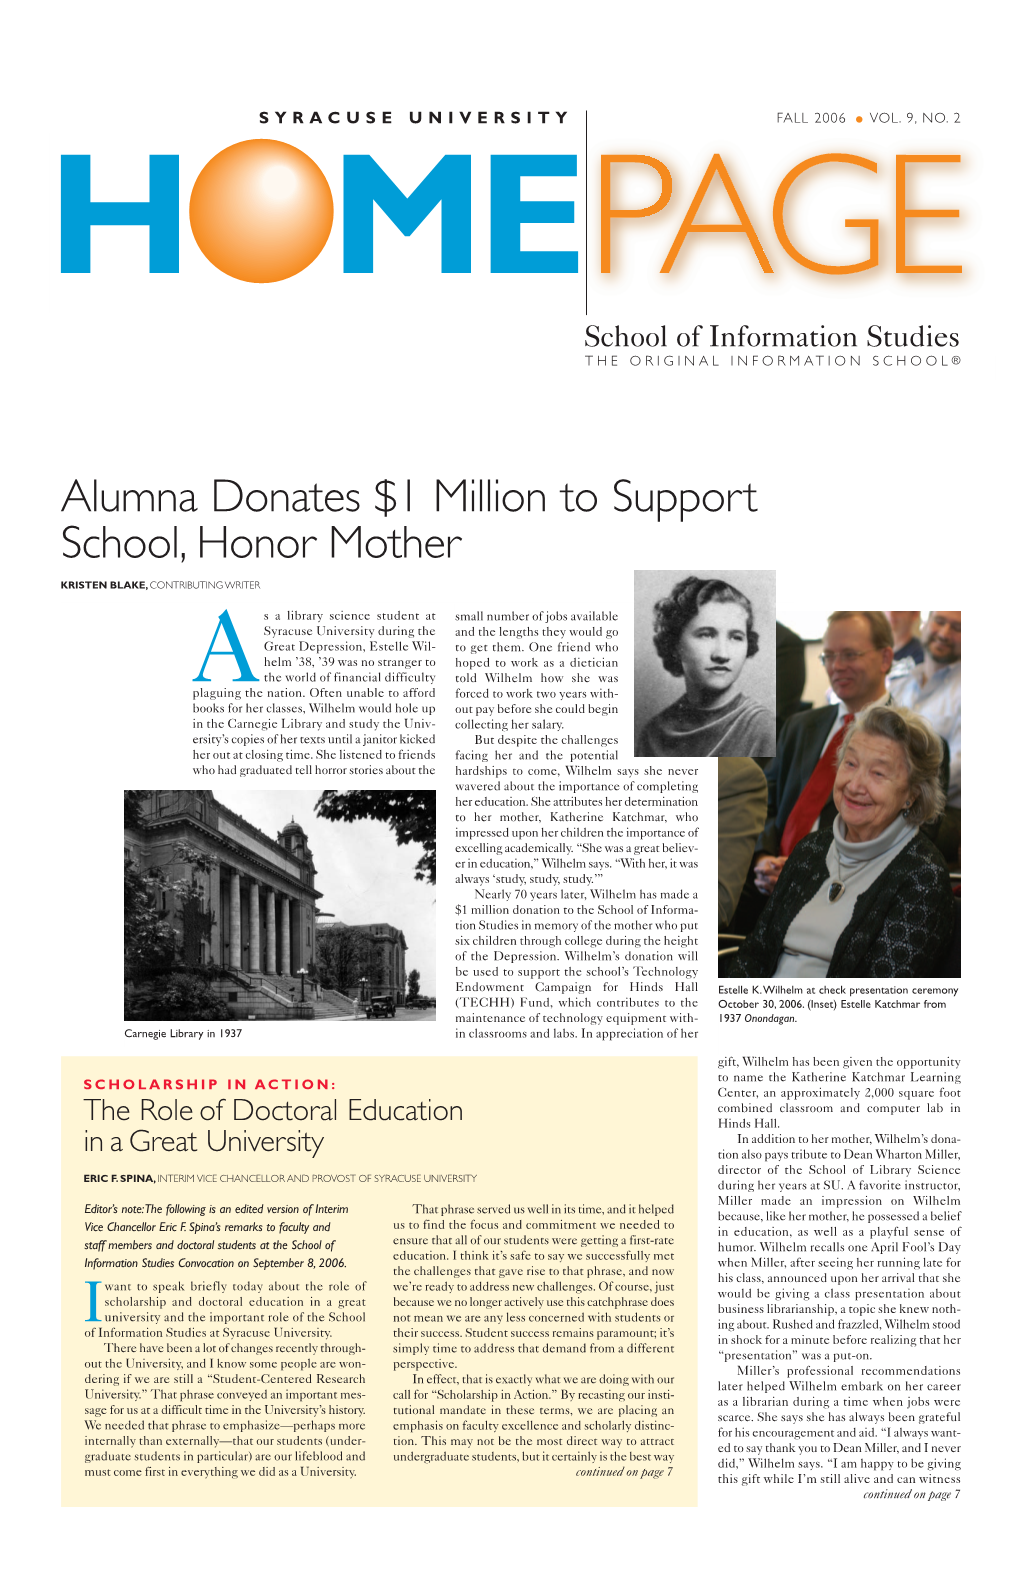 Alumna Donates $1 Million to Support School, Honor Mother